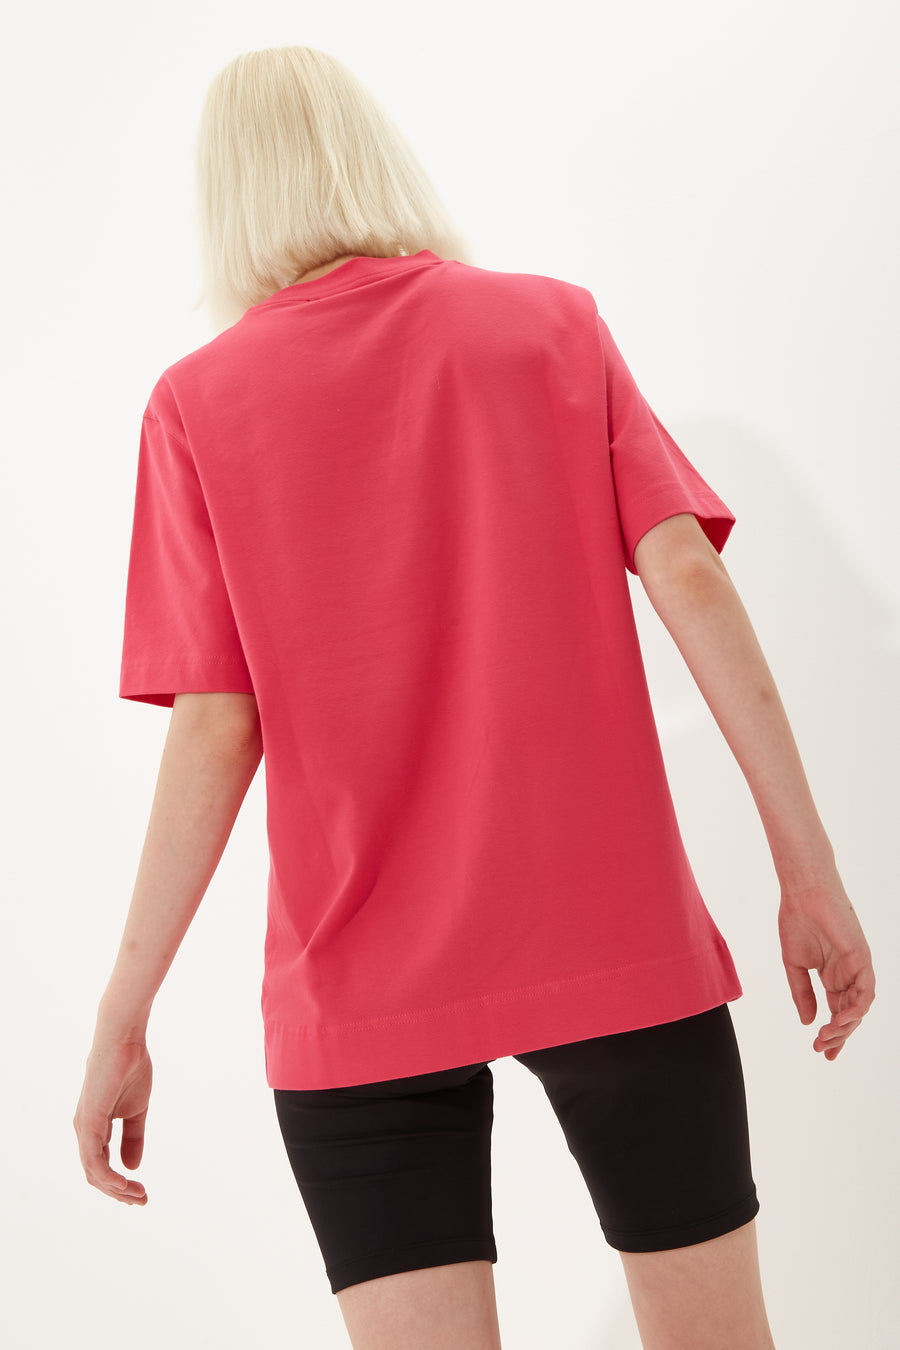 House of Holland Hot Pink Transfer Printed T-Shirt